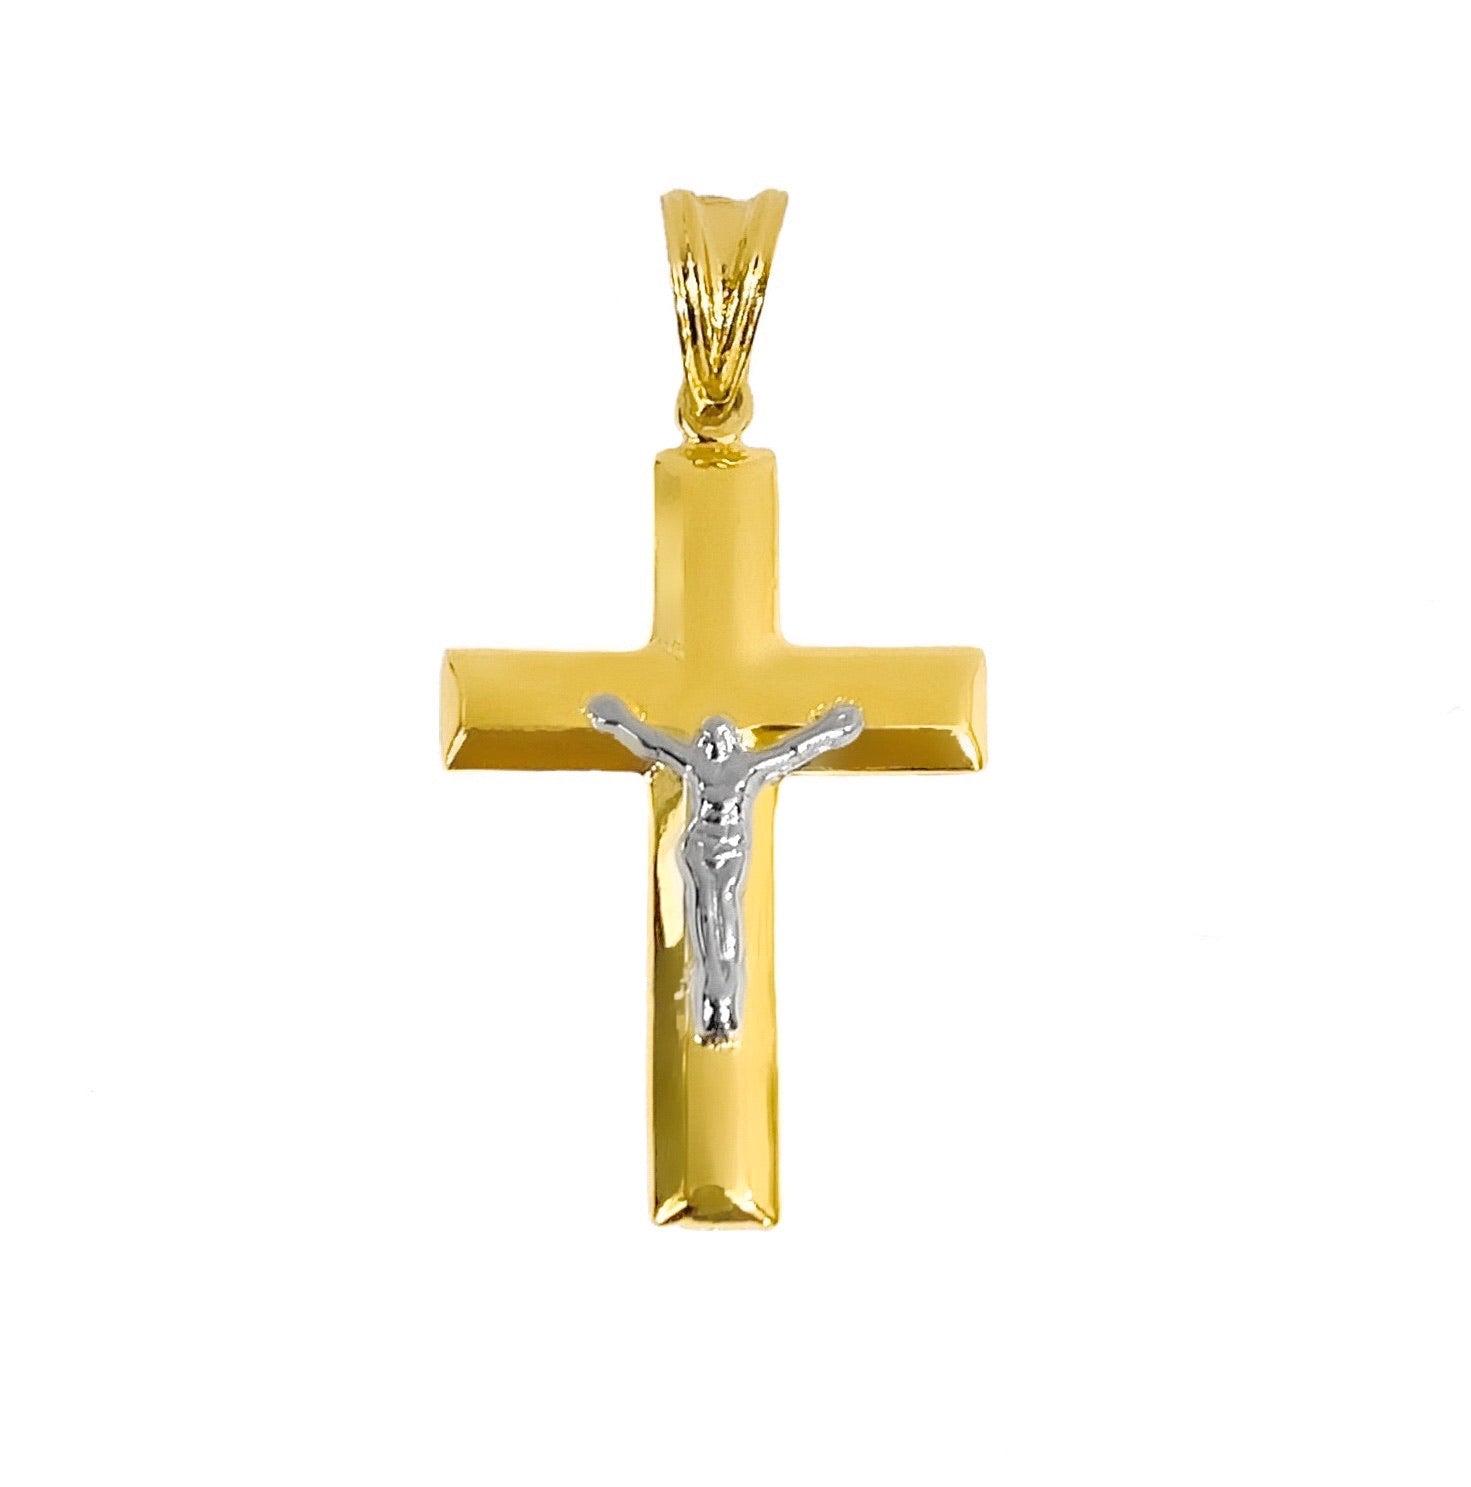 14K YELLOW GOLD TAPERED 4.5MM CROSS